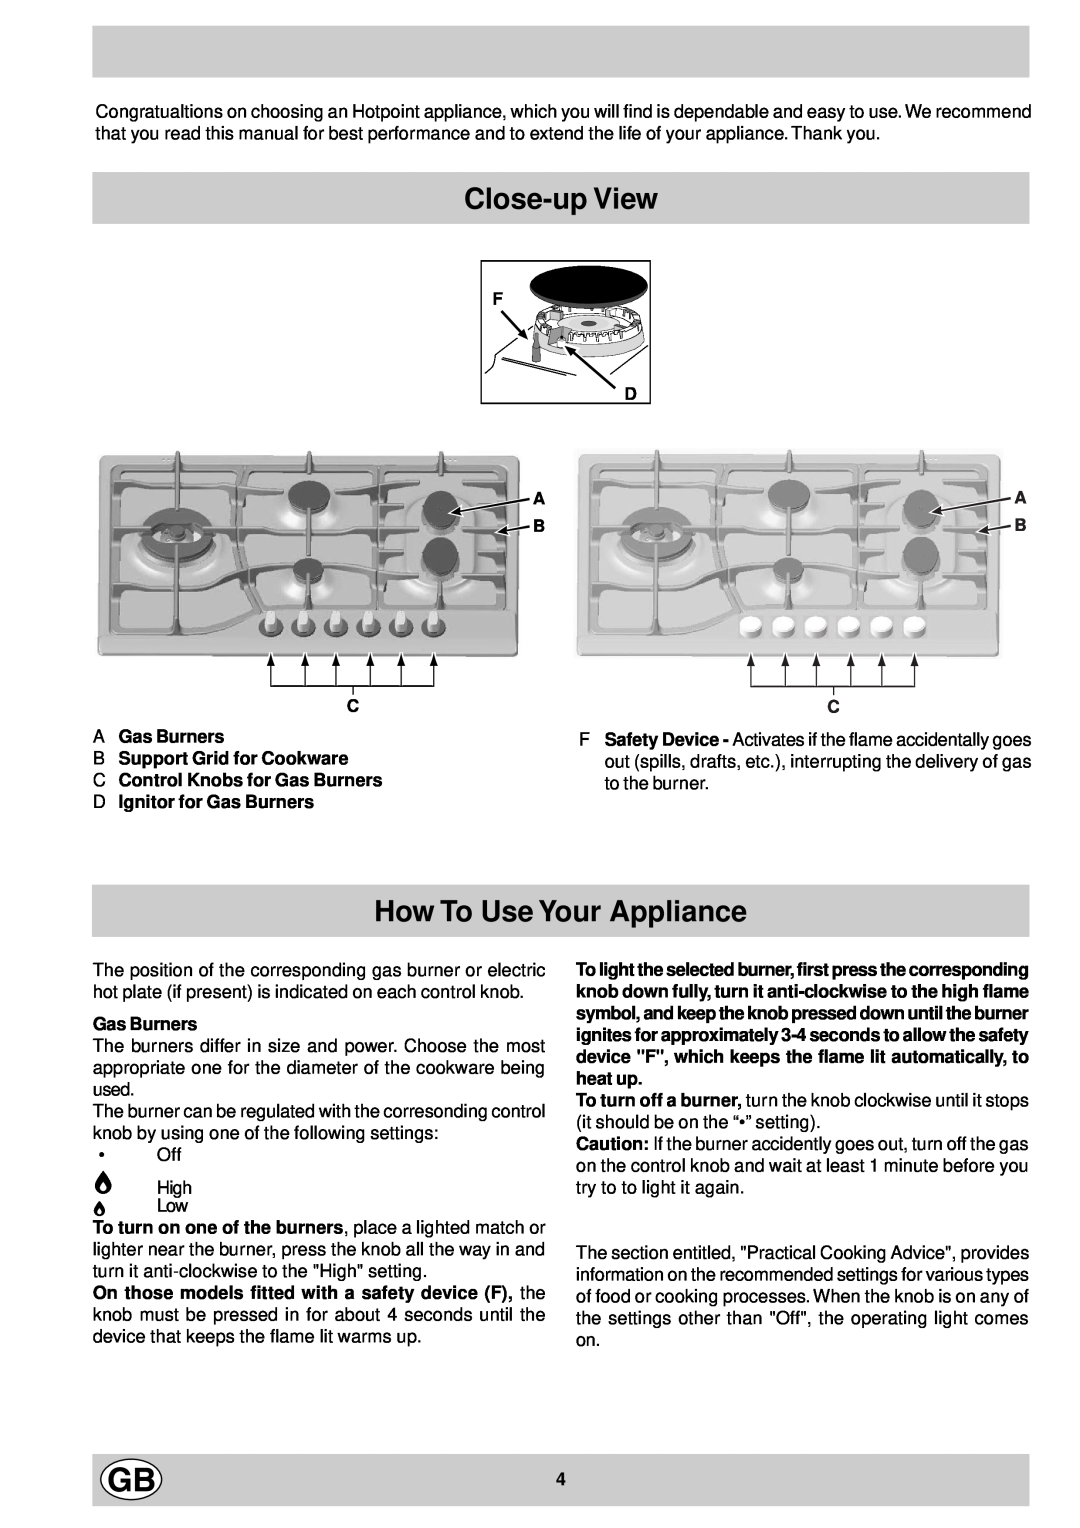 Hotpoint GF760RX, GE760RX manual Close-upView, How To Use Your Appliance 